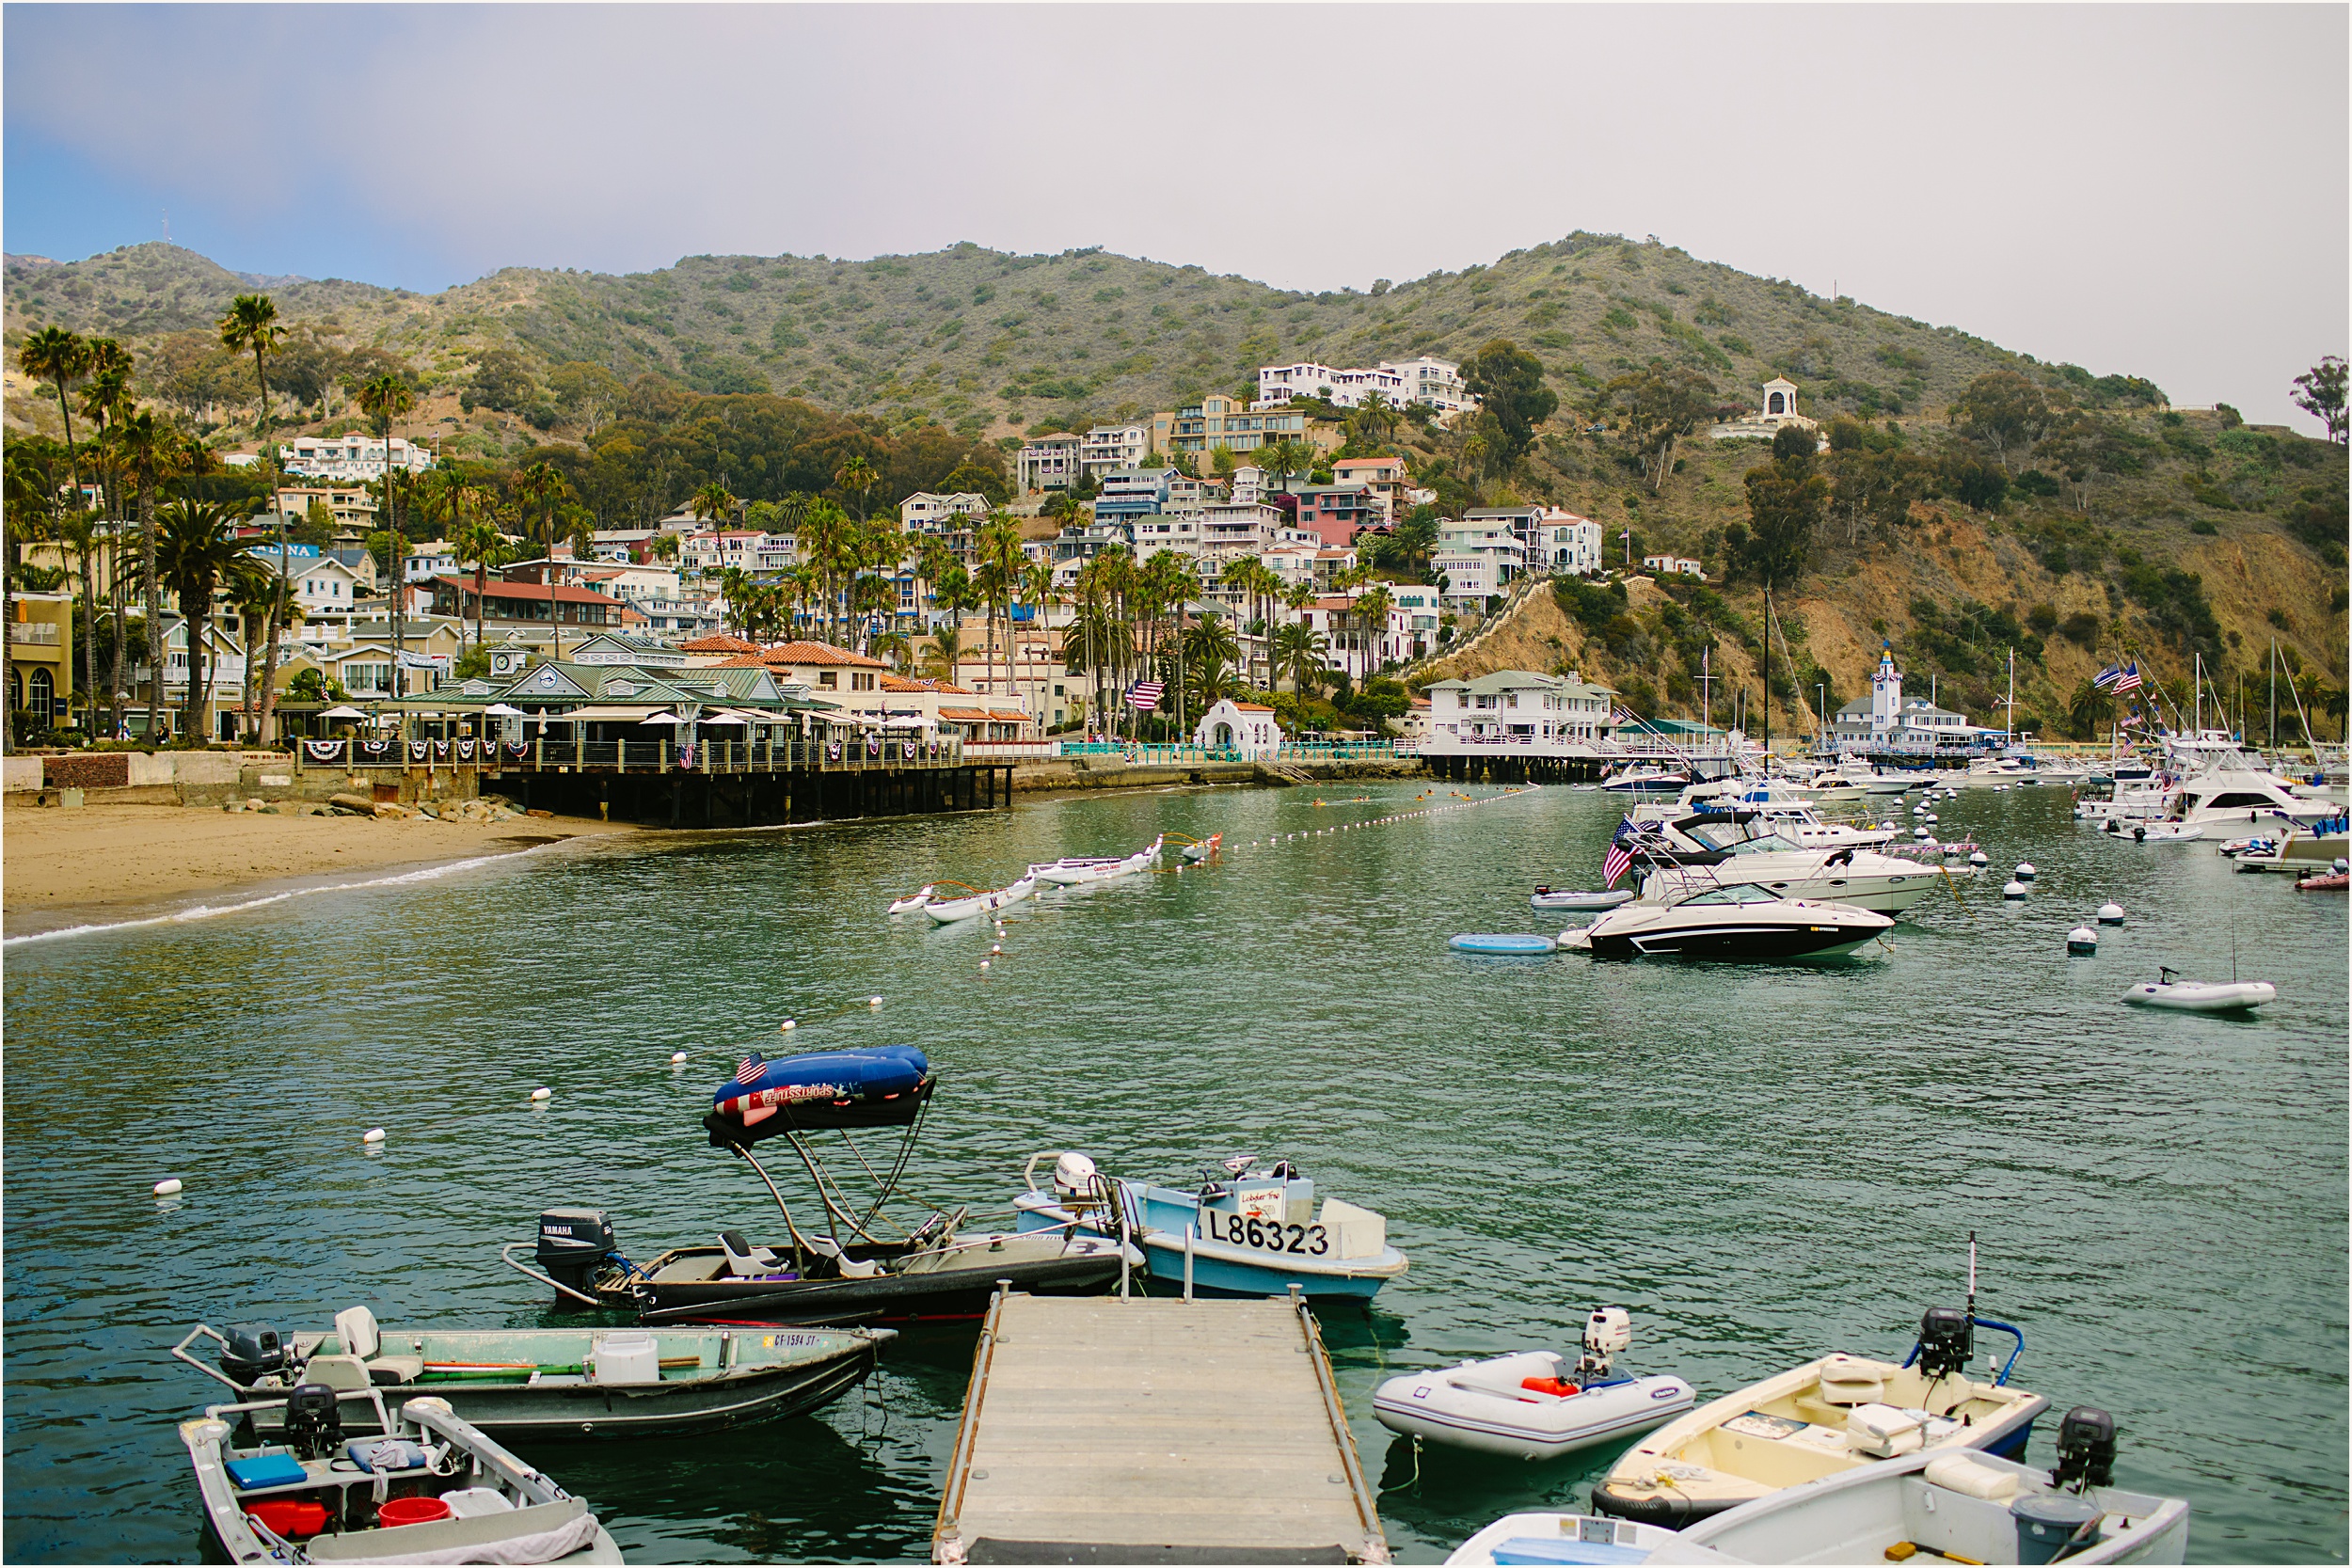 photo of a harbor with boats and houses on the island